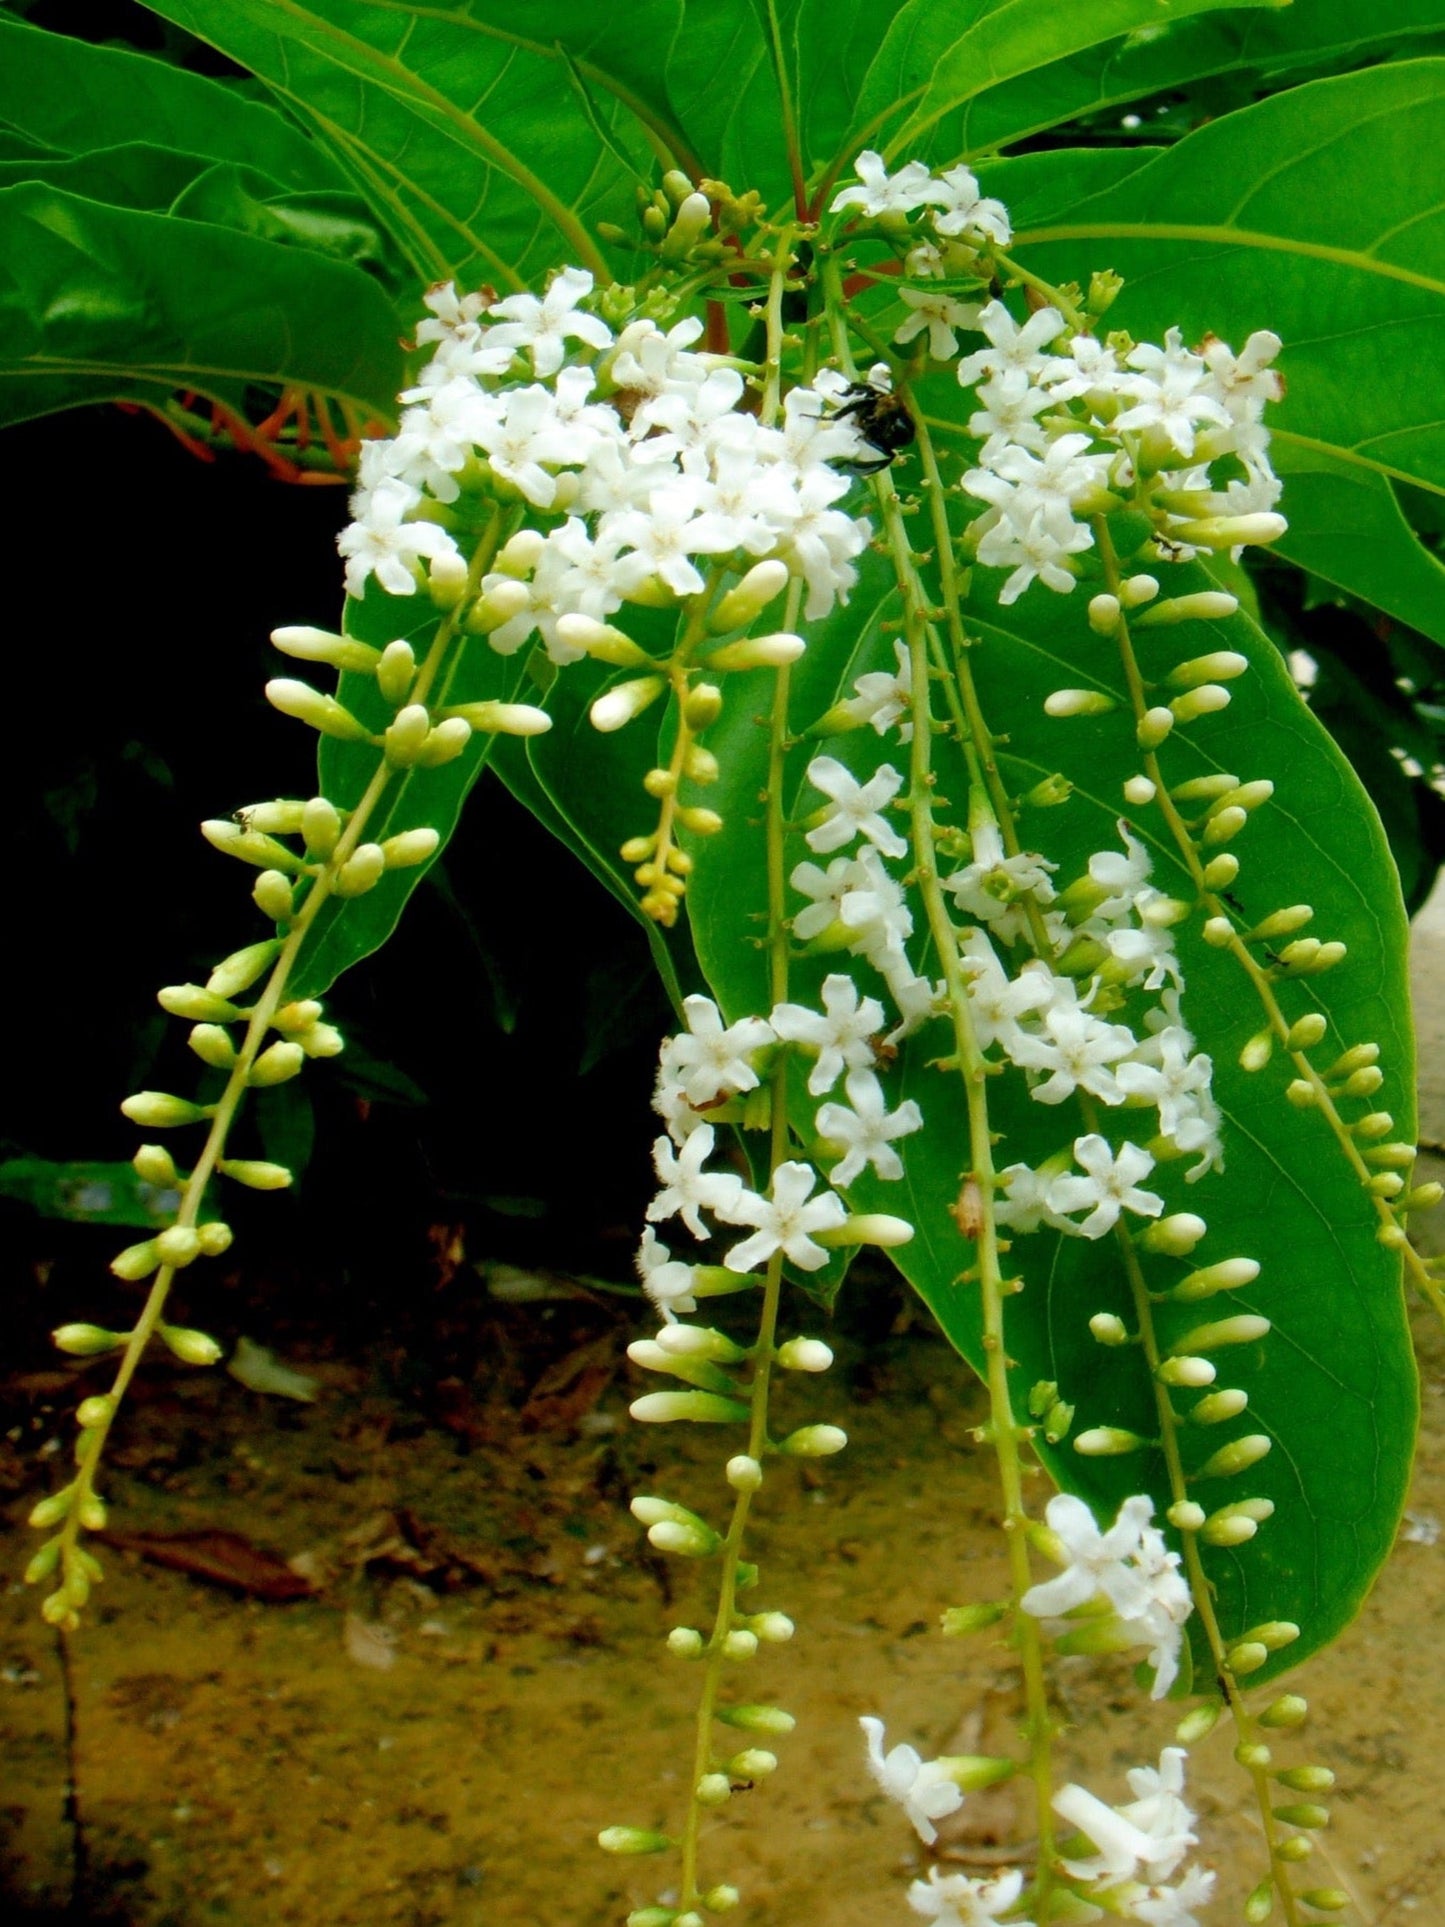 citharexylum spinosum " fiddle wood" is the host plant for the white peacock butterfly